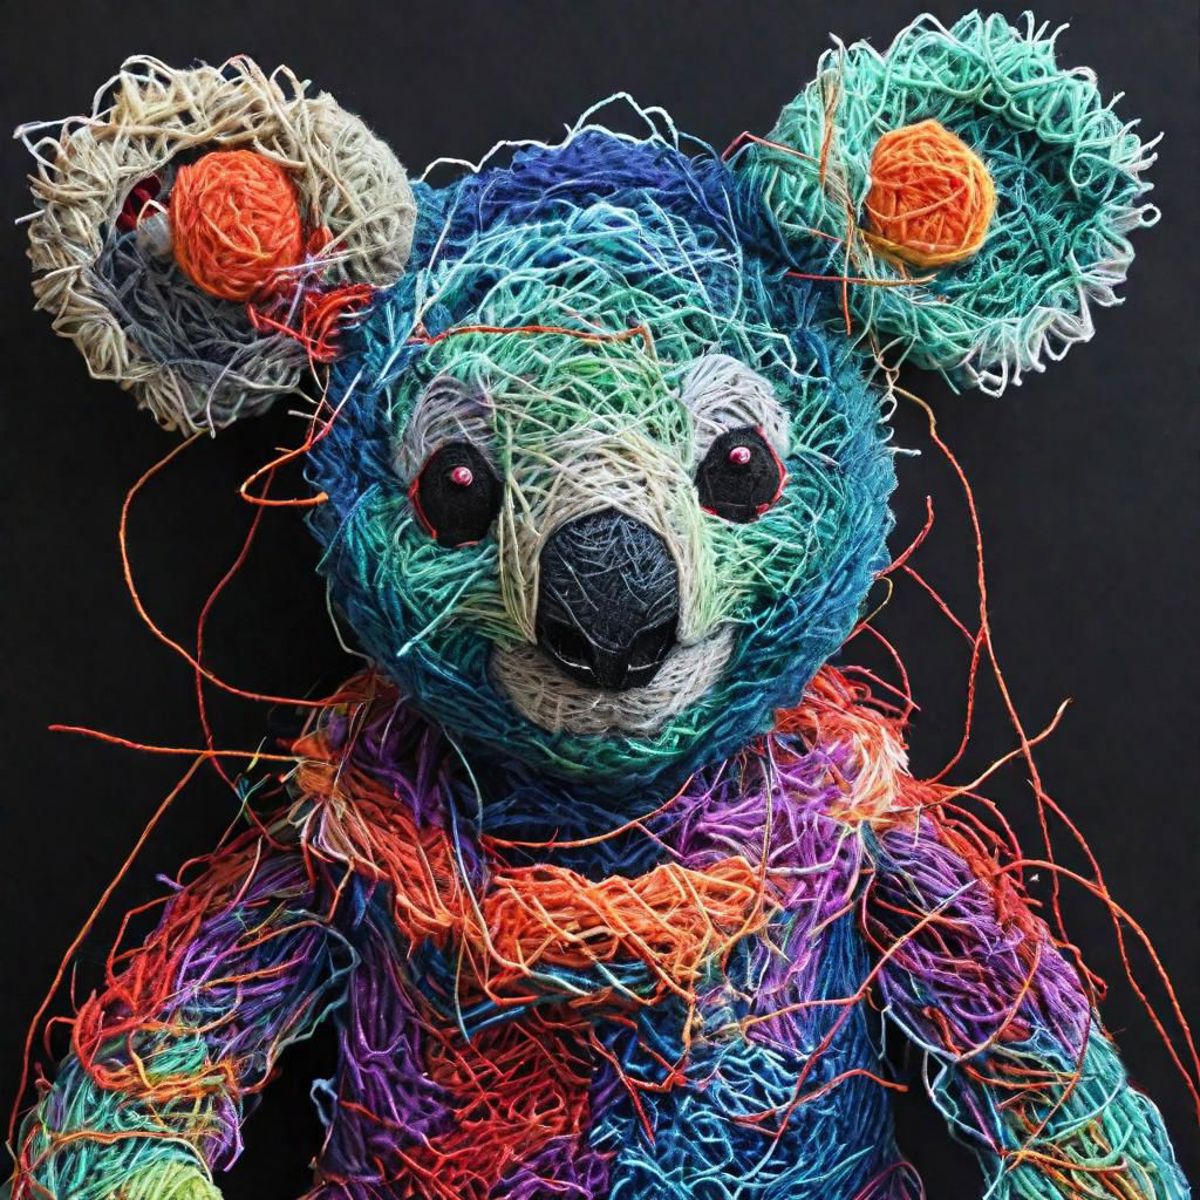 A colorful teddy bear made of yarn and string.